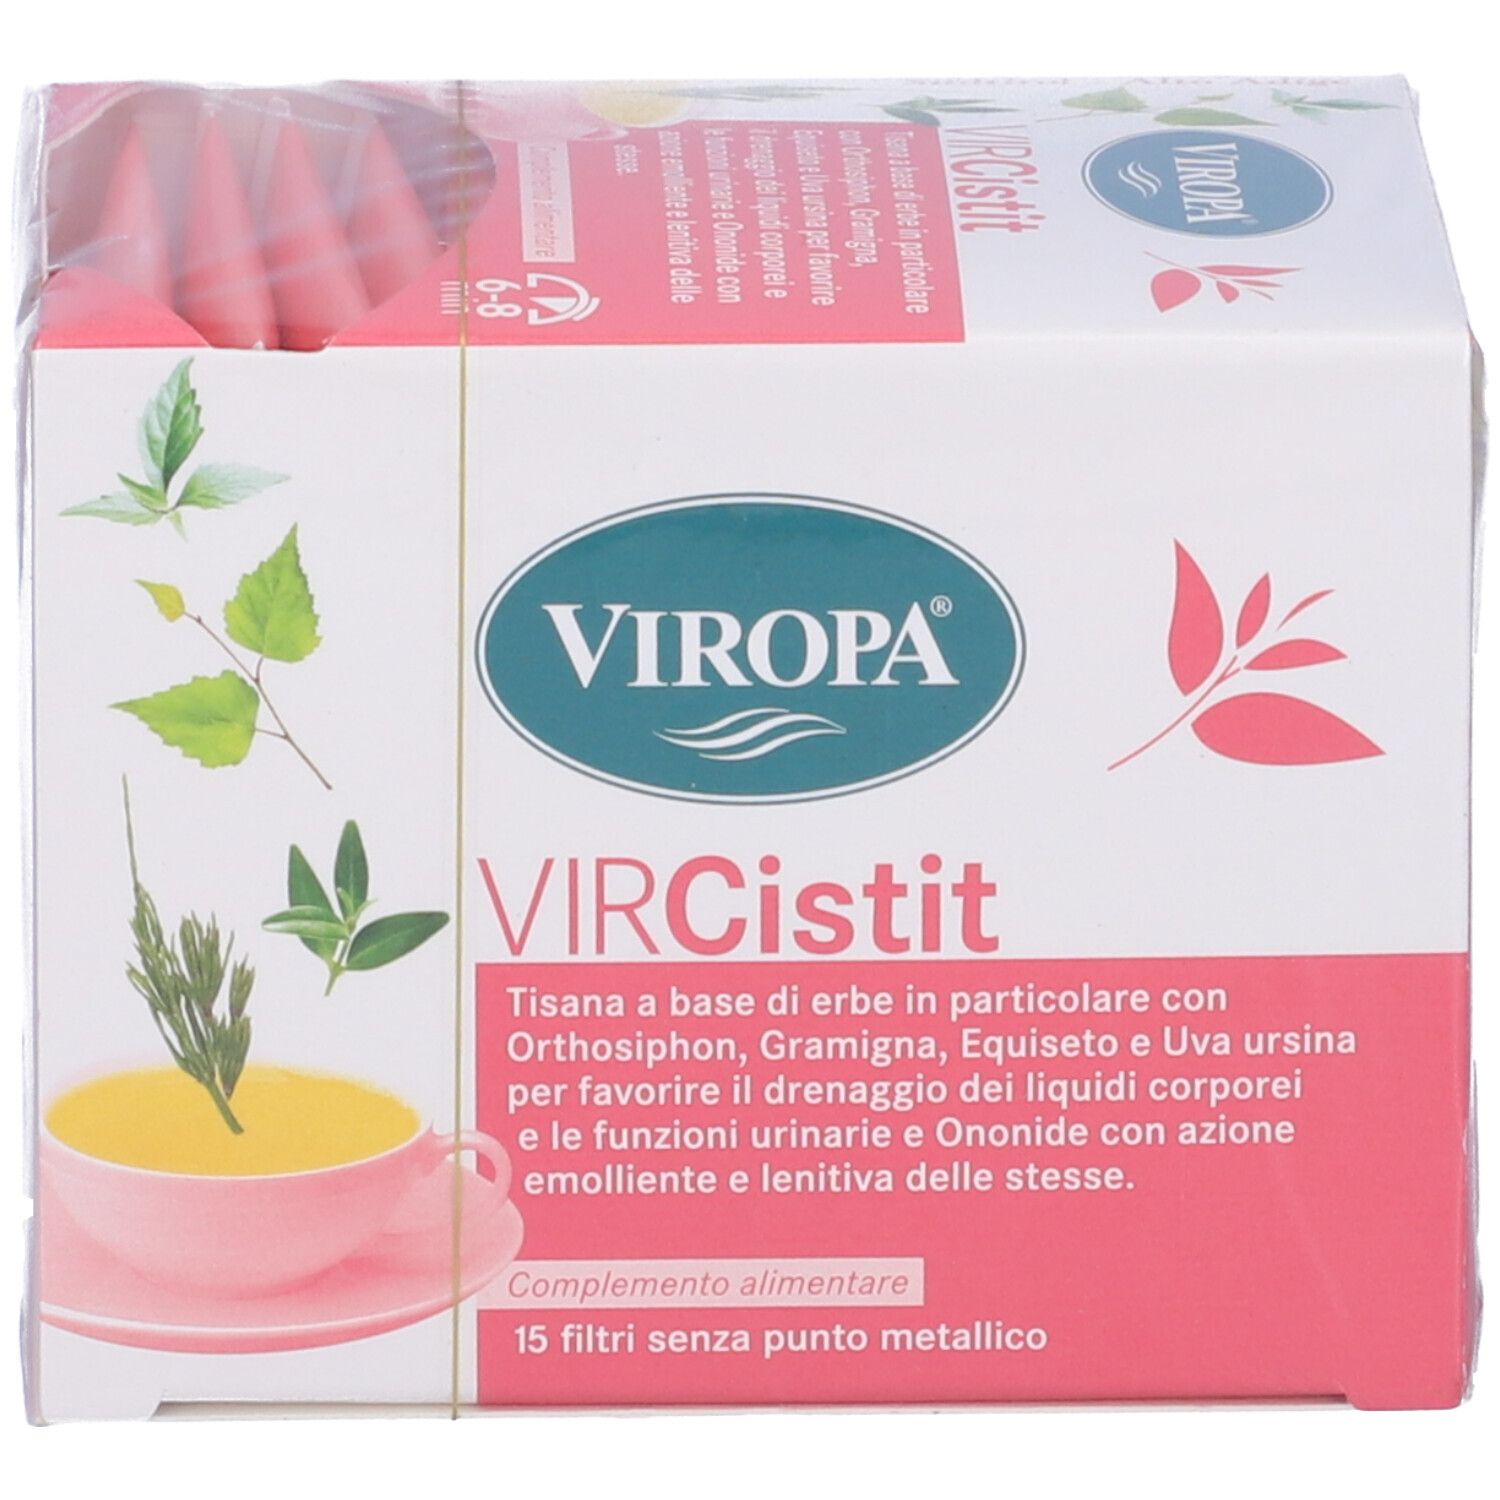 Viropa Vircist 15Bust